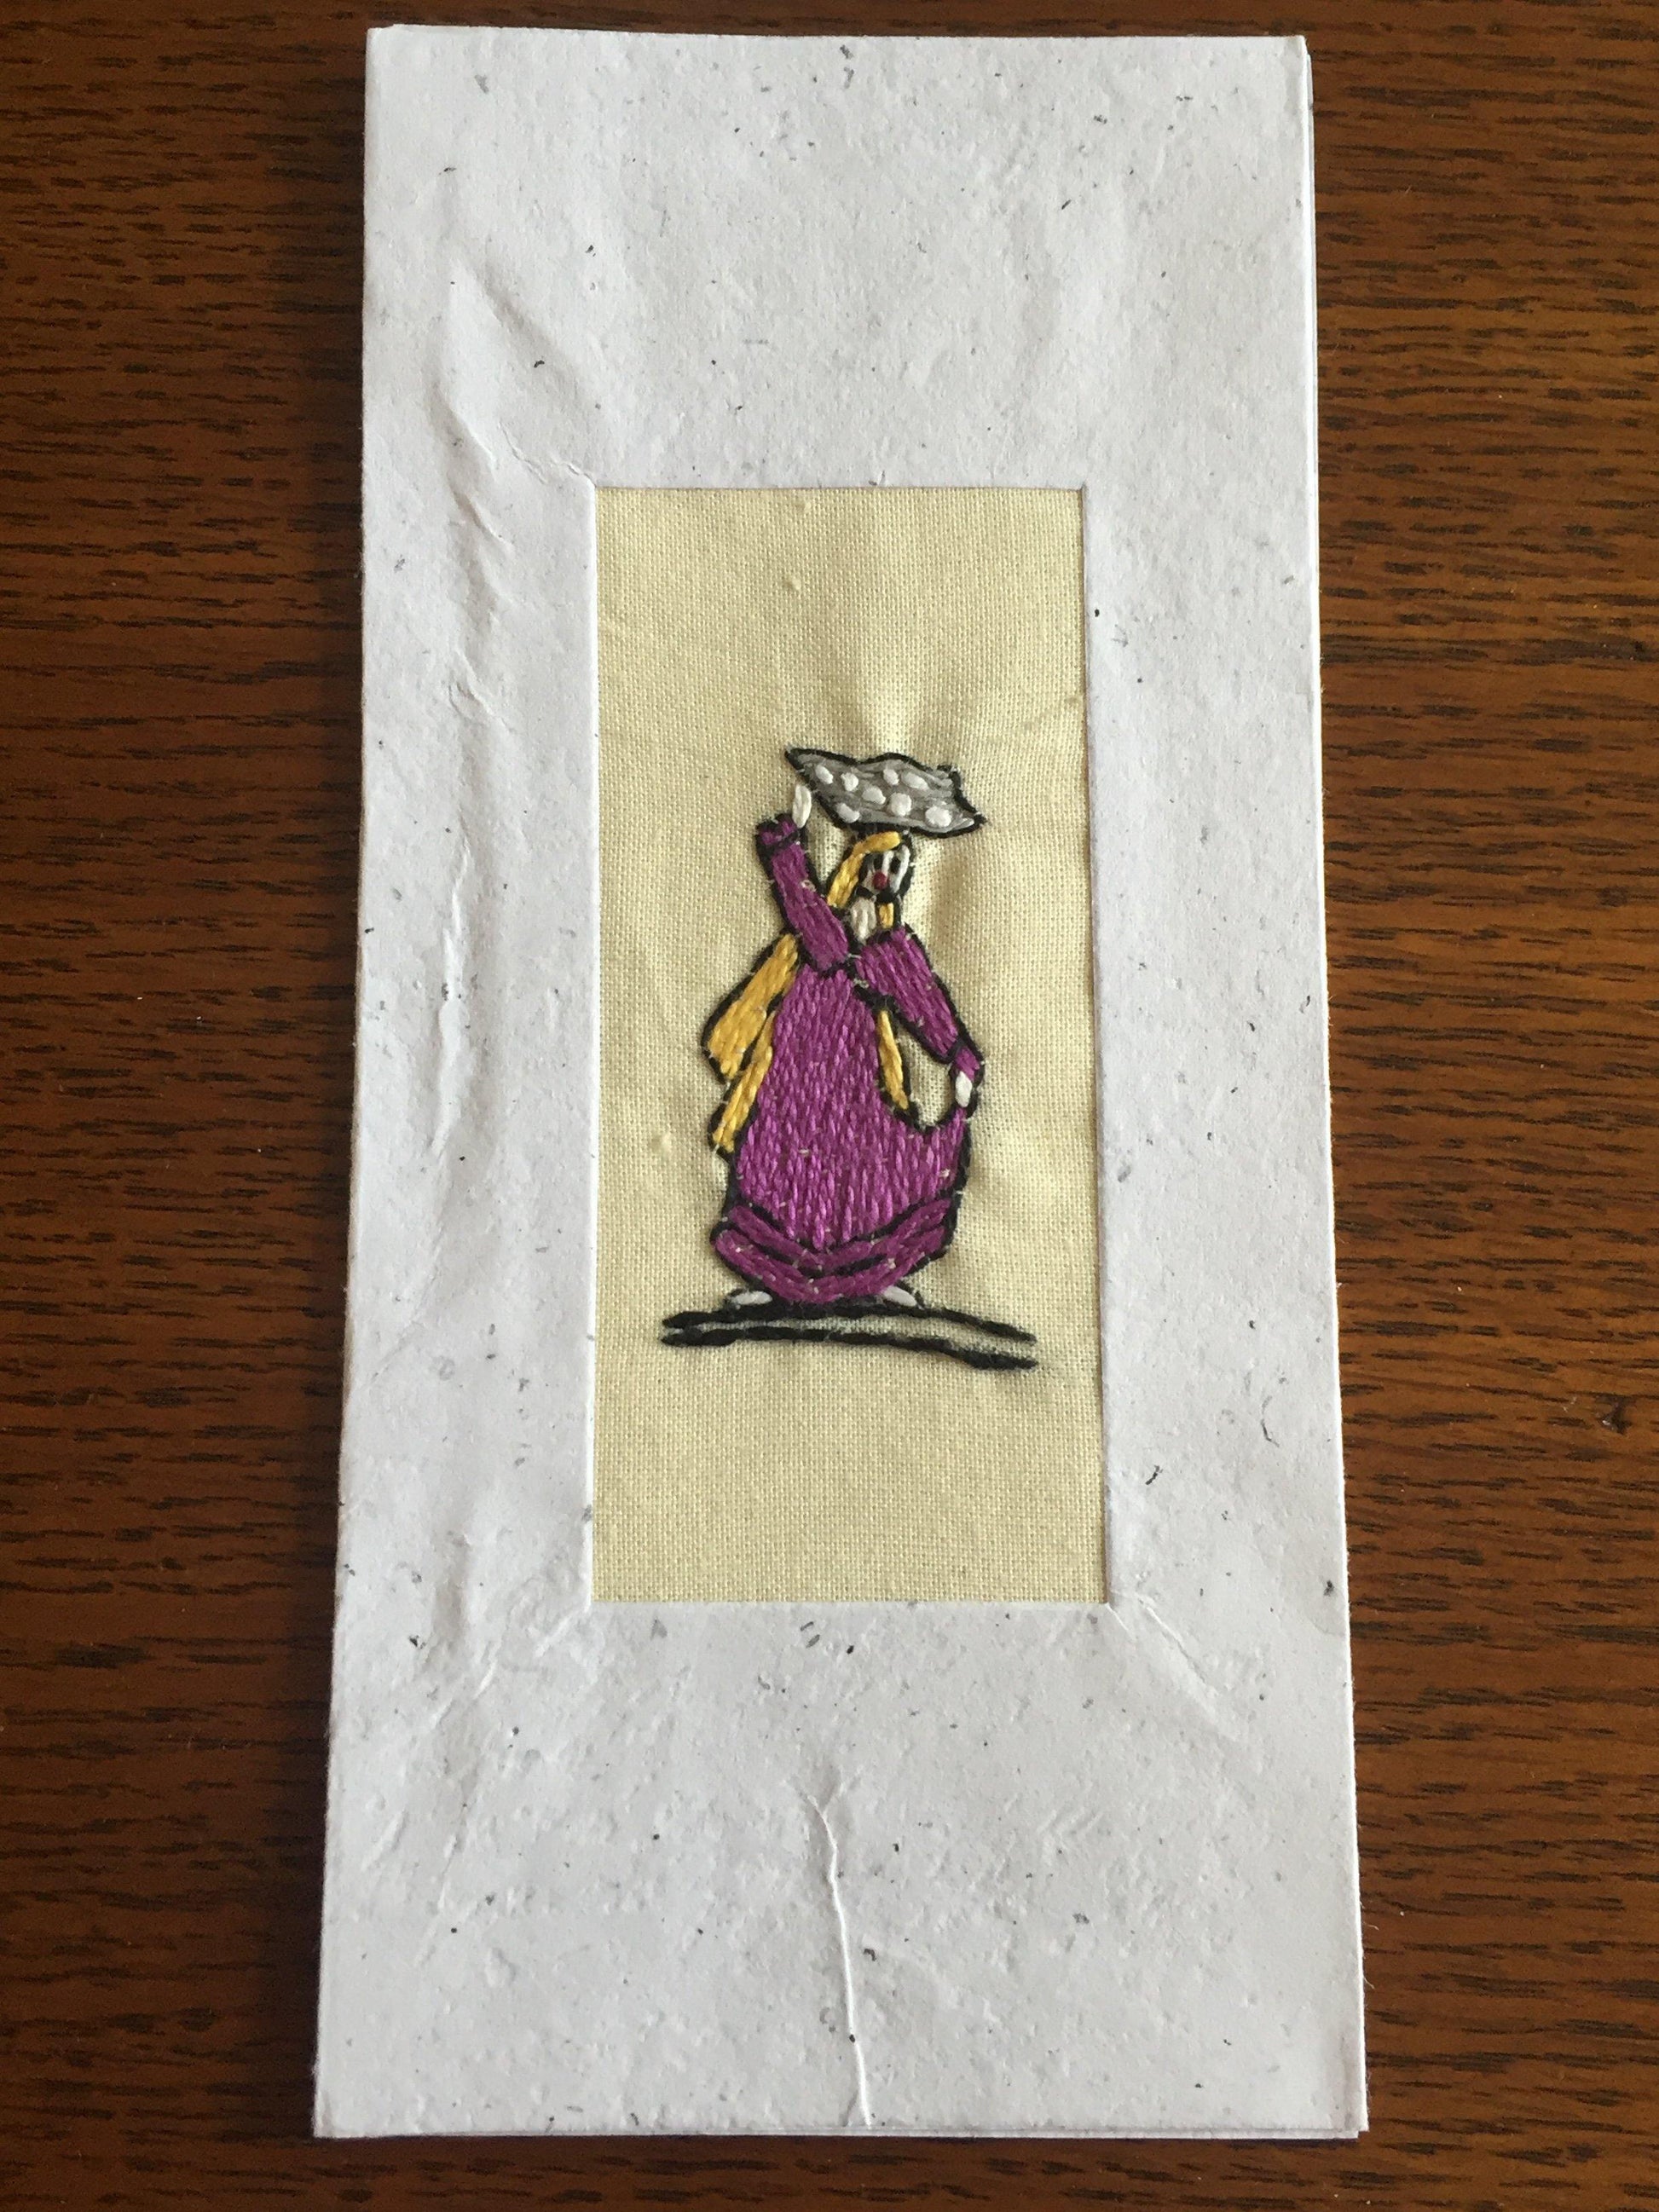 Handmade Recycled Paper Greeting Card with Embroidery - Water Carrier